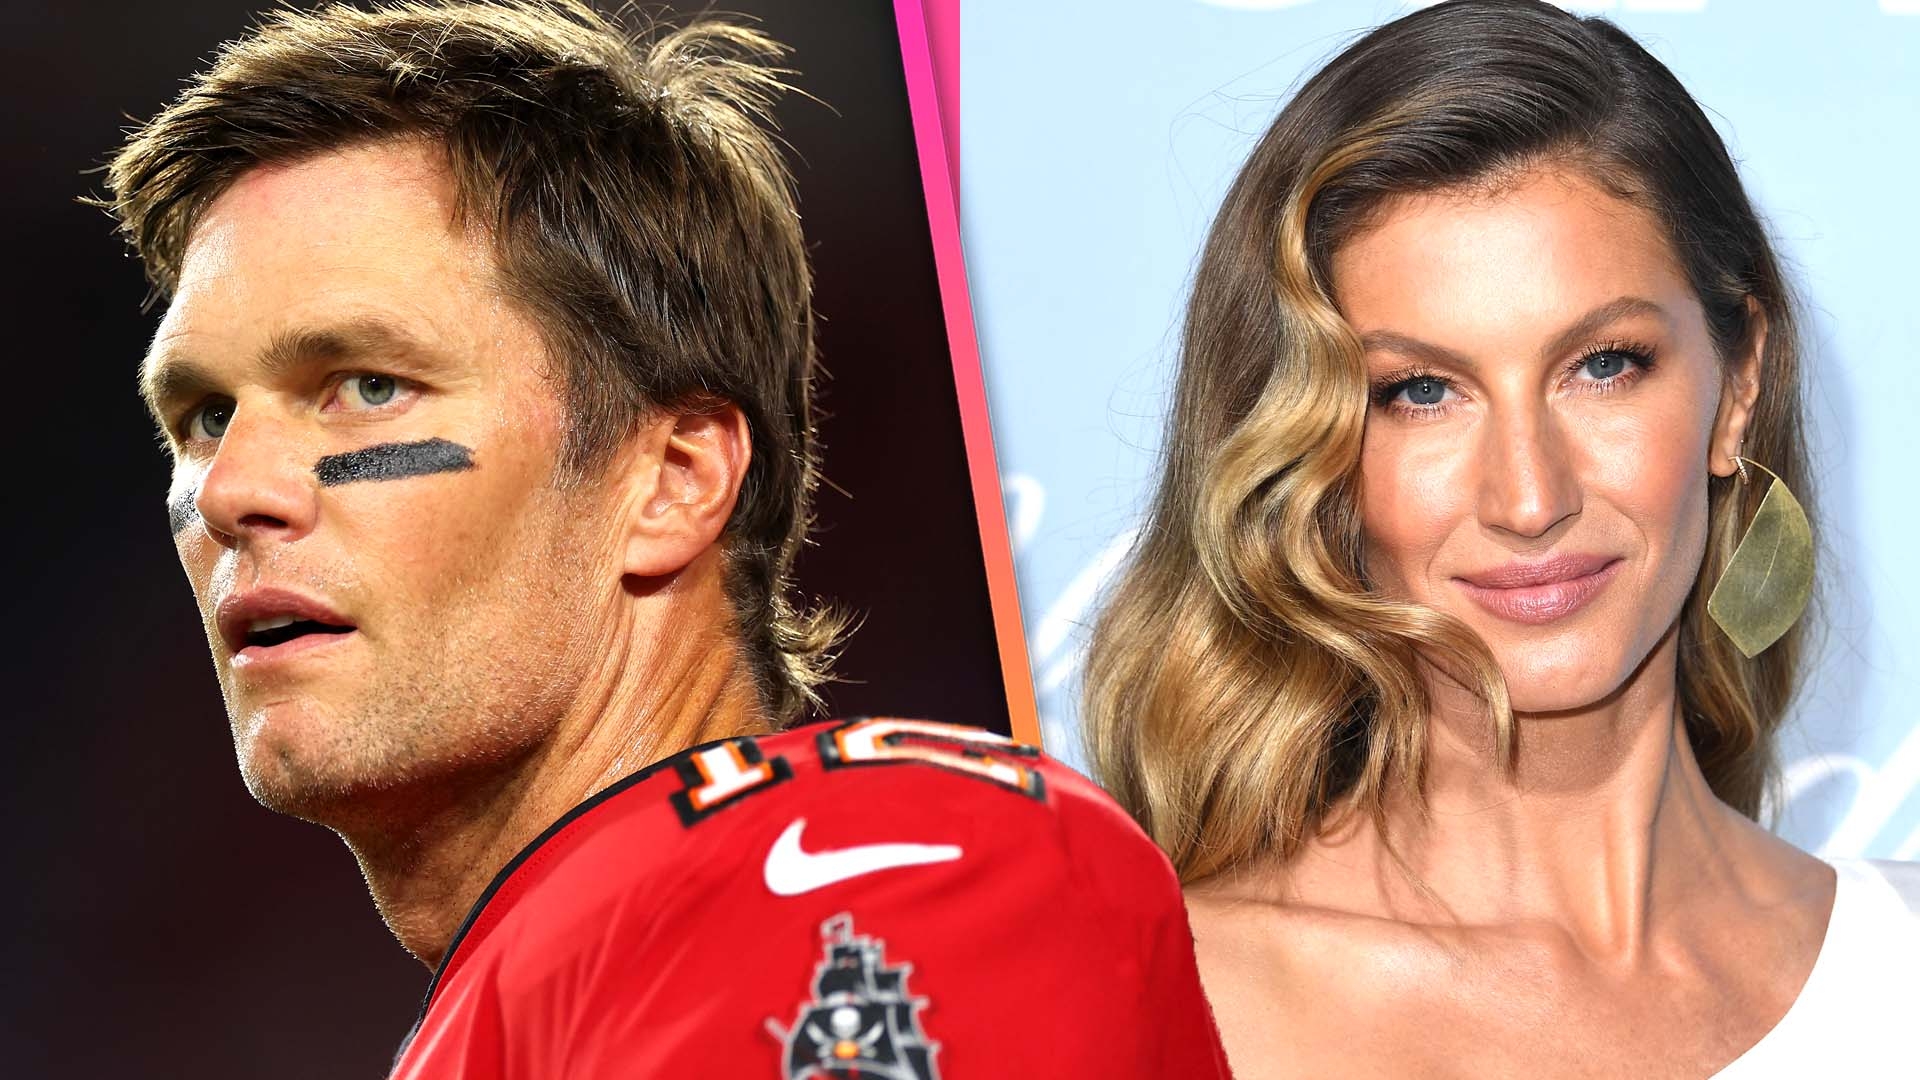 Tom Brady admits to failures, talks co-parenting with Gisele Bündchen  following divorce